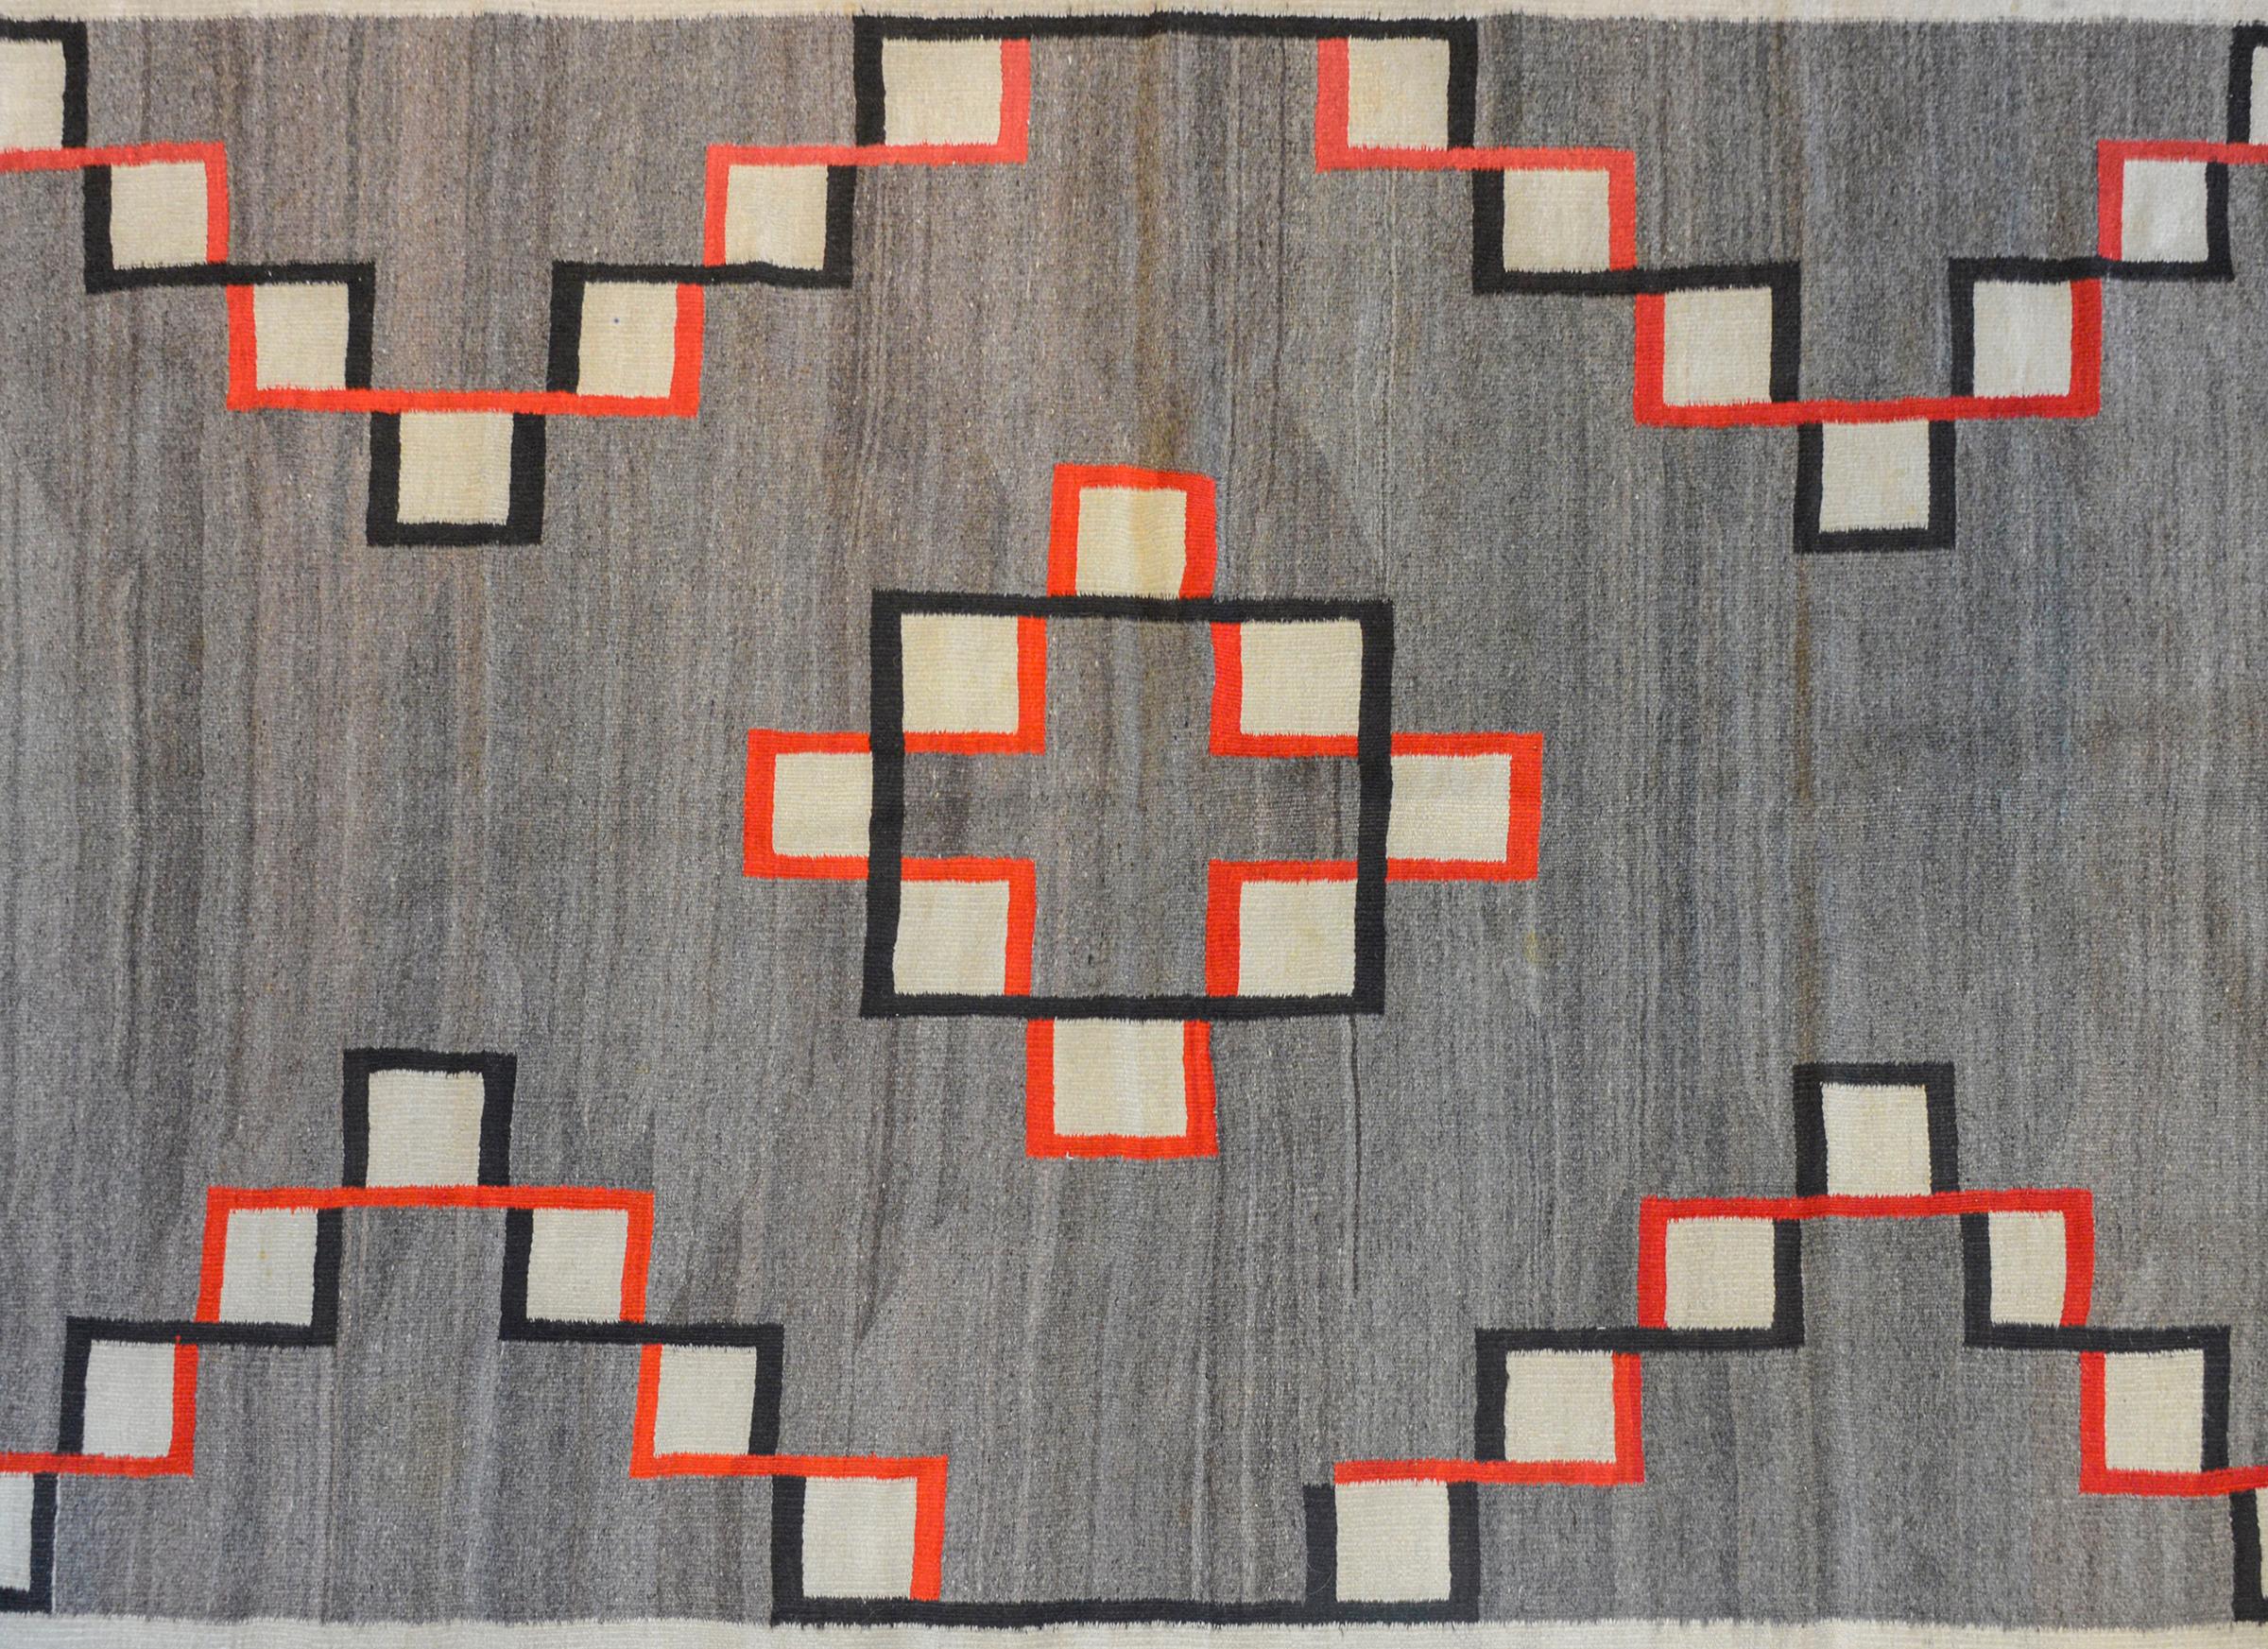 An outstanding late 19th century Navajo rug with a fantastic pattern of interlocking crimson and black lines around white squares creating a zigzag pattern across an abrash gray field.